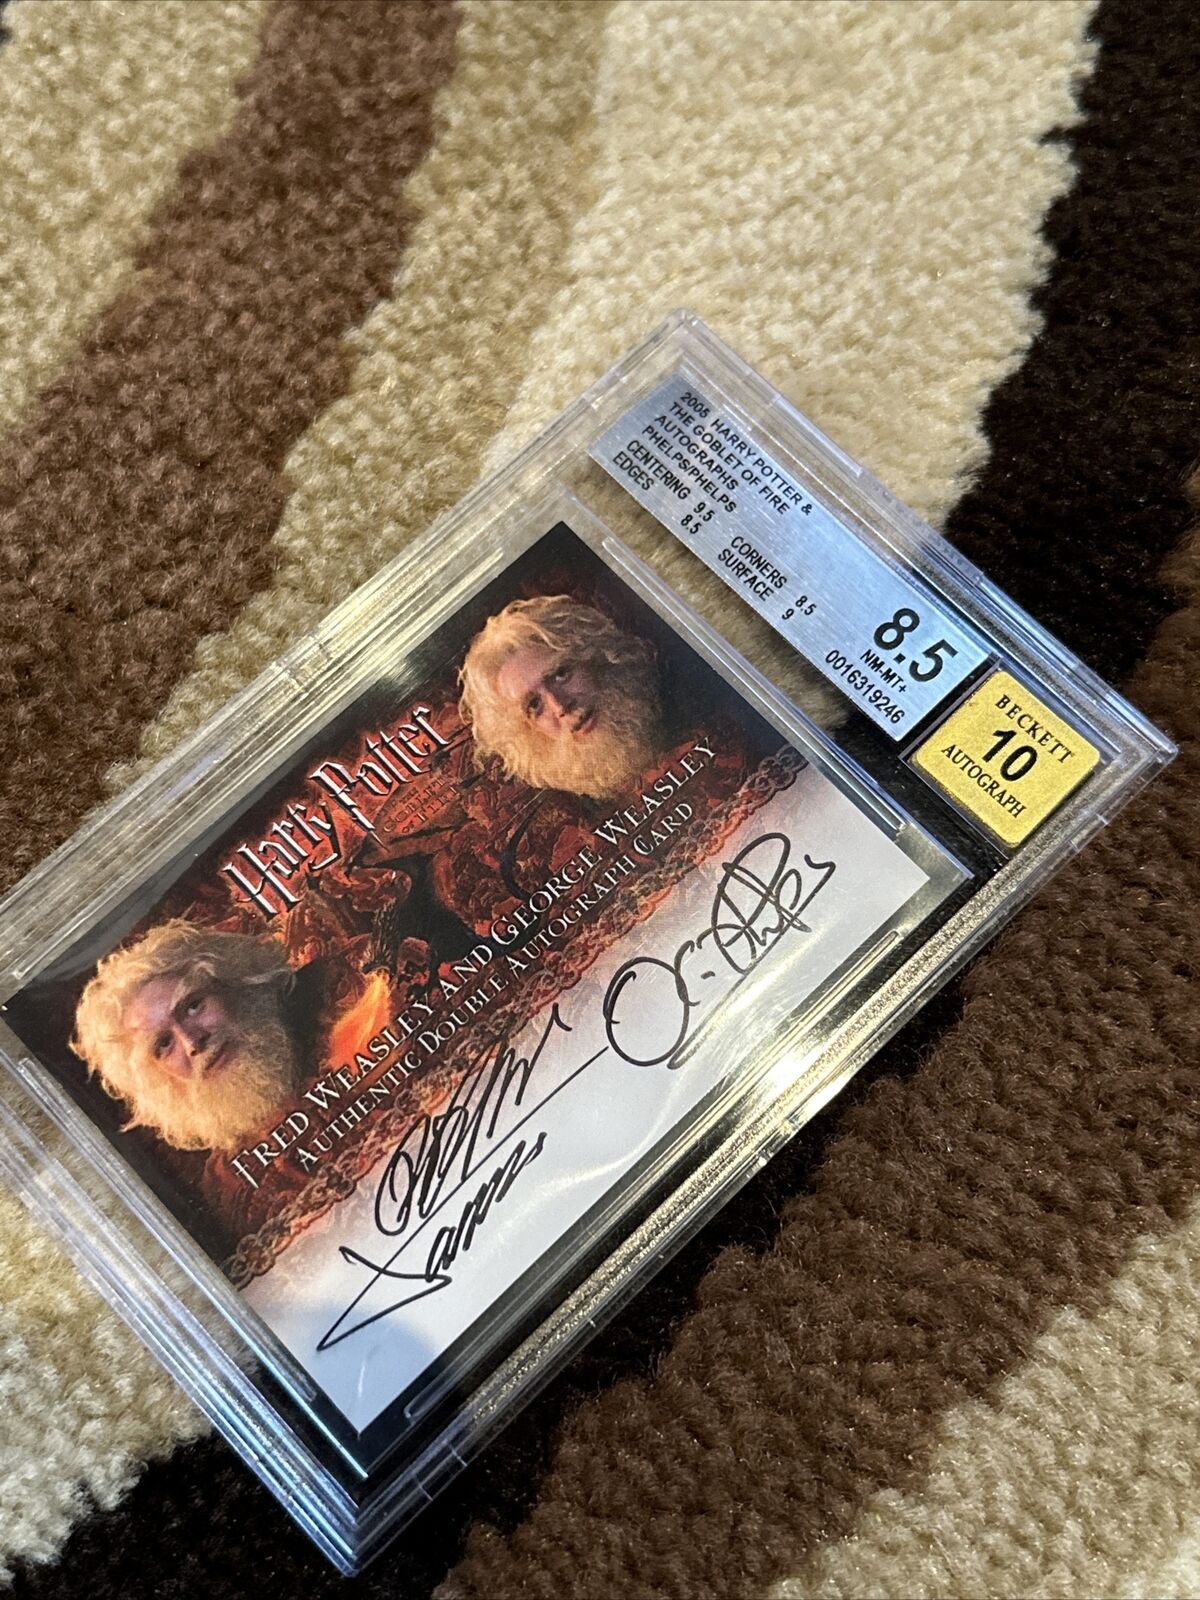 2005 Artbox Harry Potter GOF Weasley Brothers Phelps Dual Auto BGS 8.5